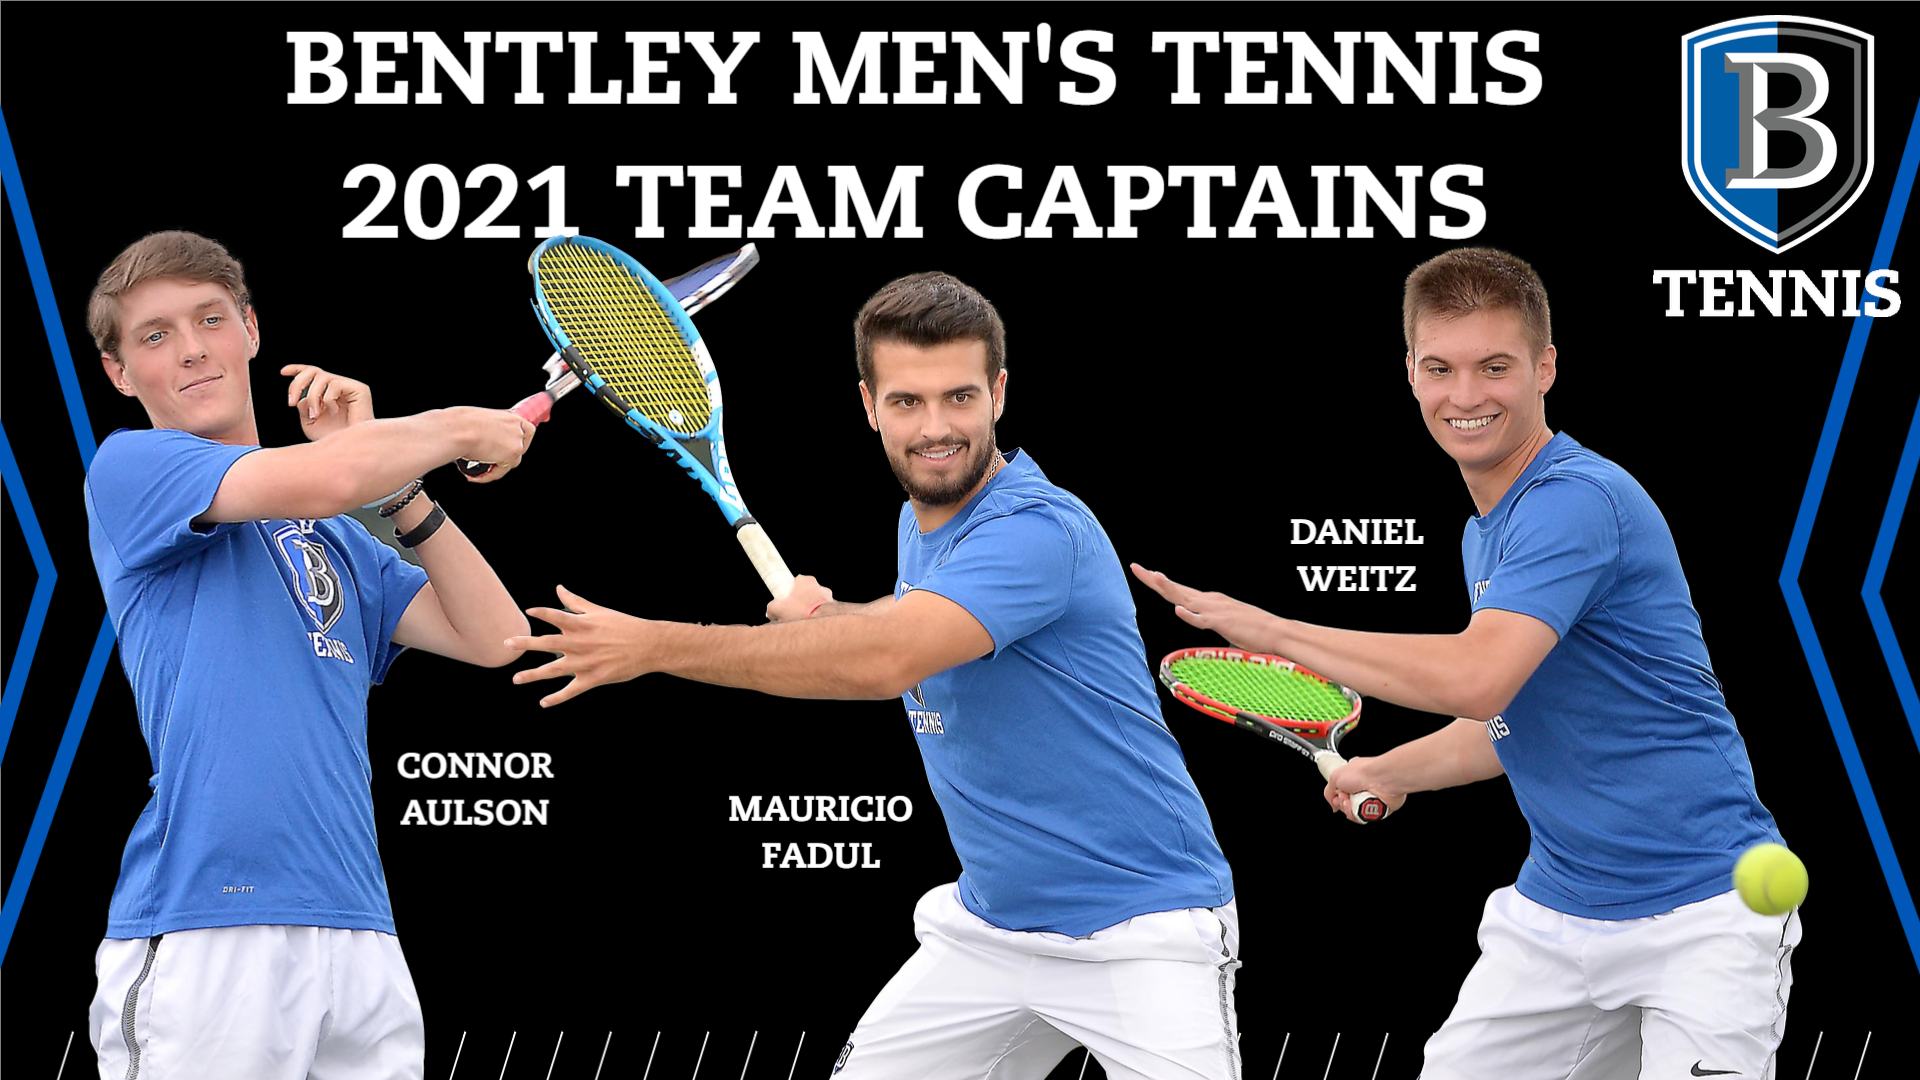 Aulson, Fadul and Weitz to Serve as Bentley Men’s Tennis Team Captains